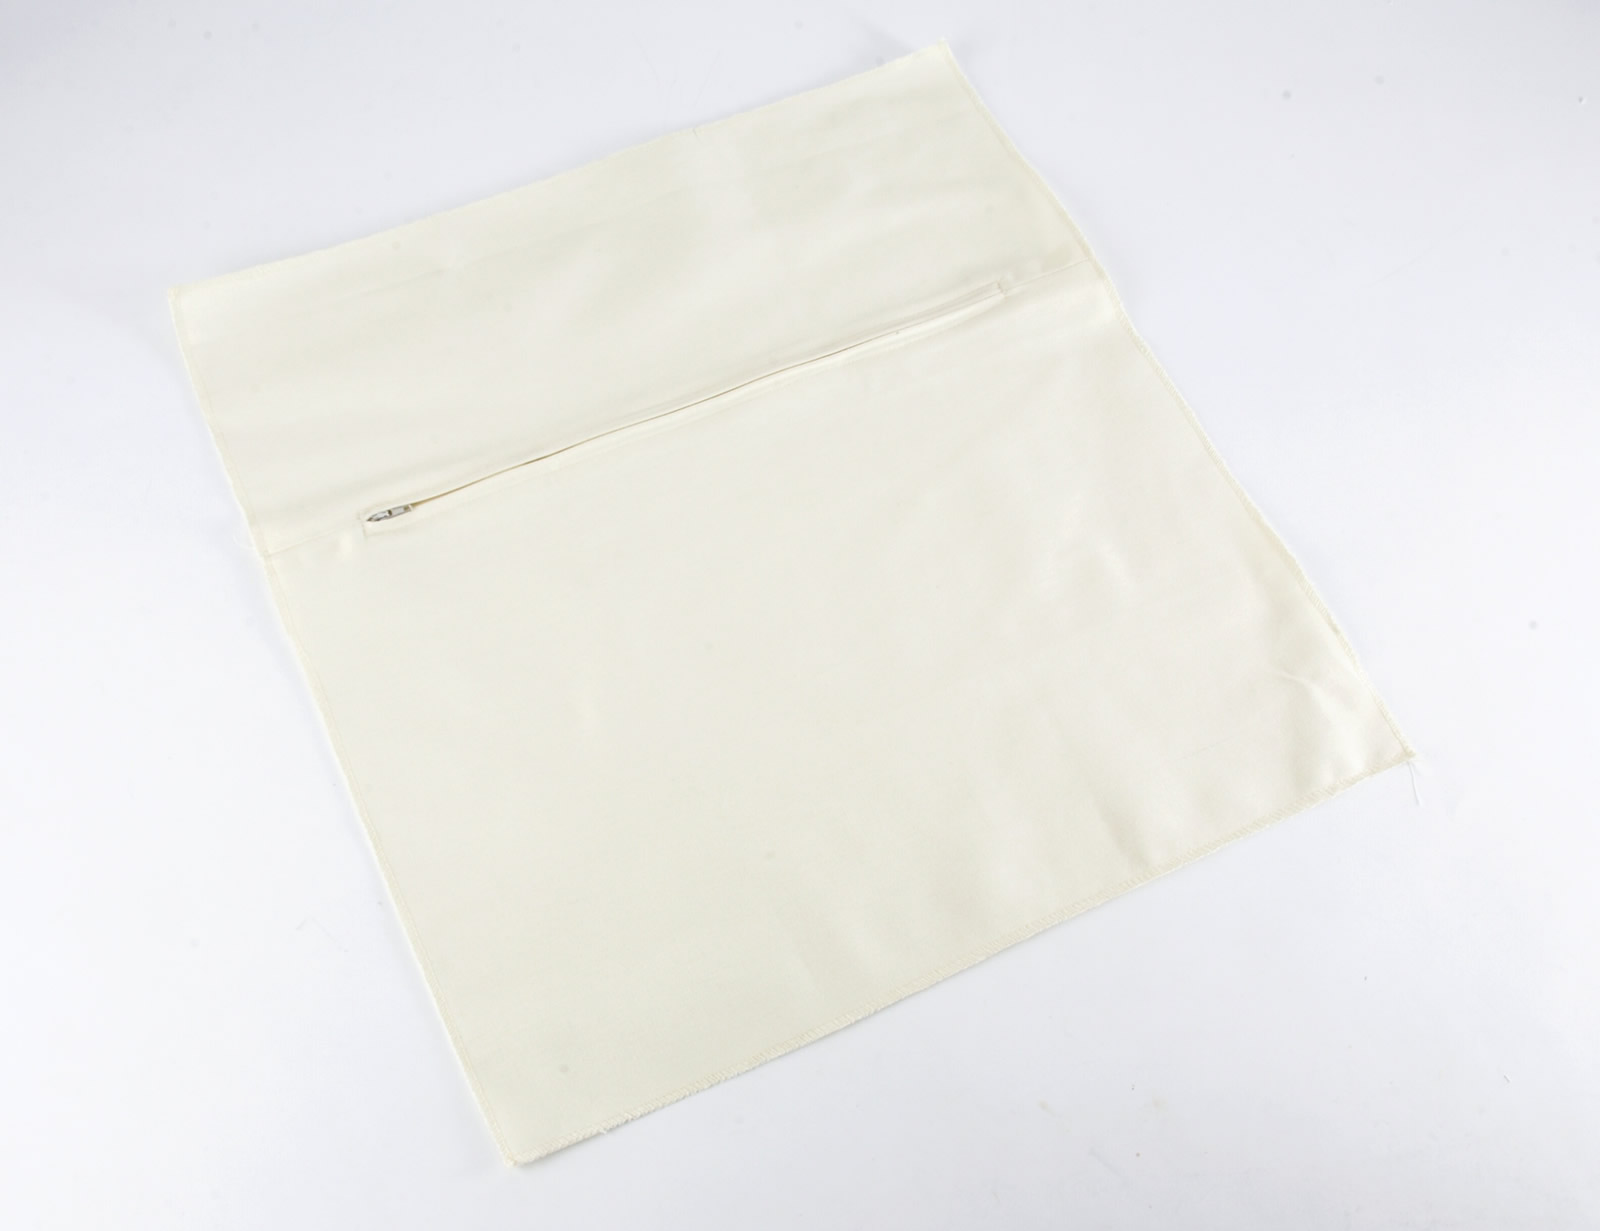 Cushion Back with Zip - Cream 45 x 45cm (18 x 18in)